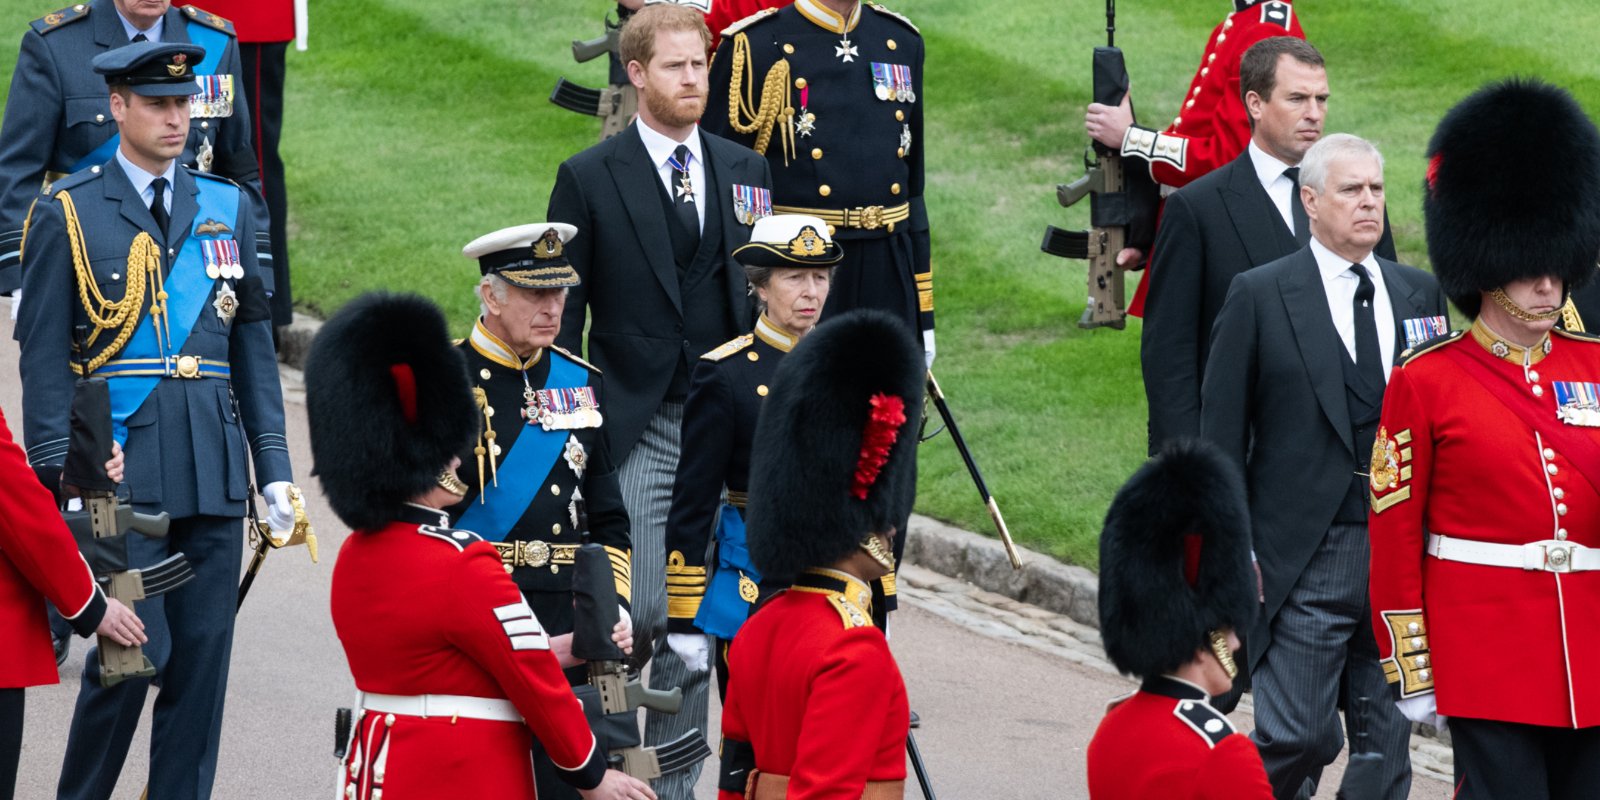 Prince William, Prince Harry, Prince Charles, Princess Anne and Prince Andrew appear at the committal service for Queen Elizabeth in the fall of 2022.